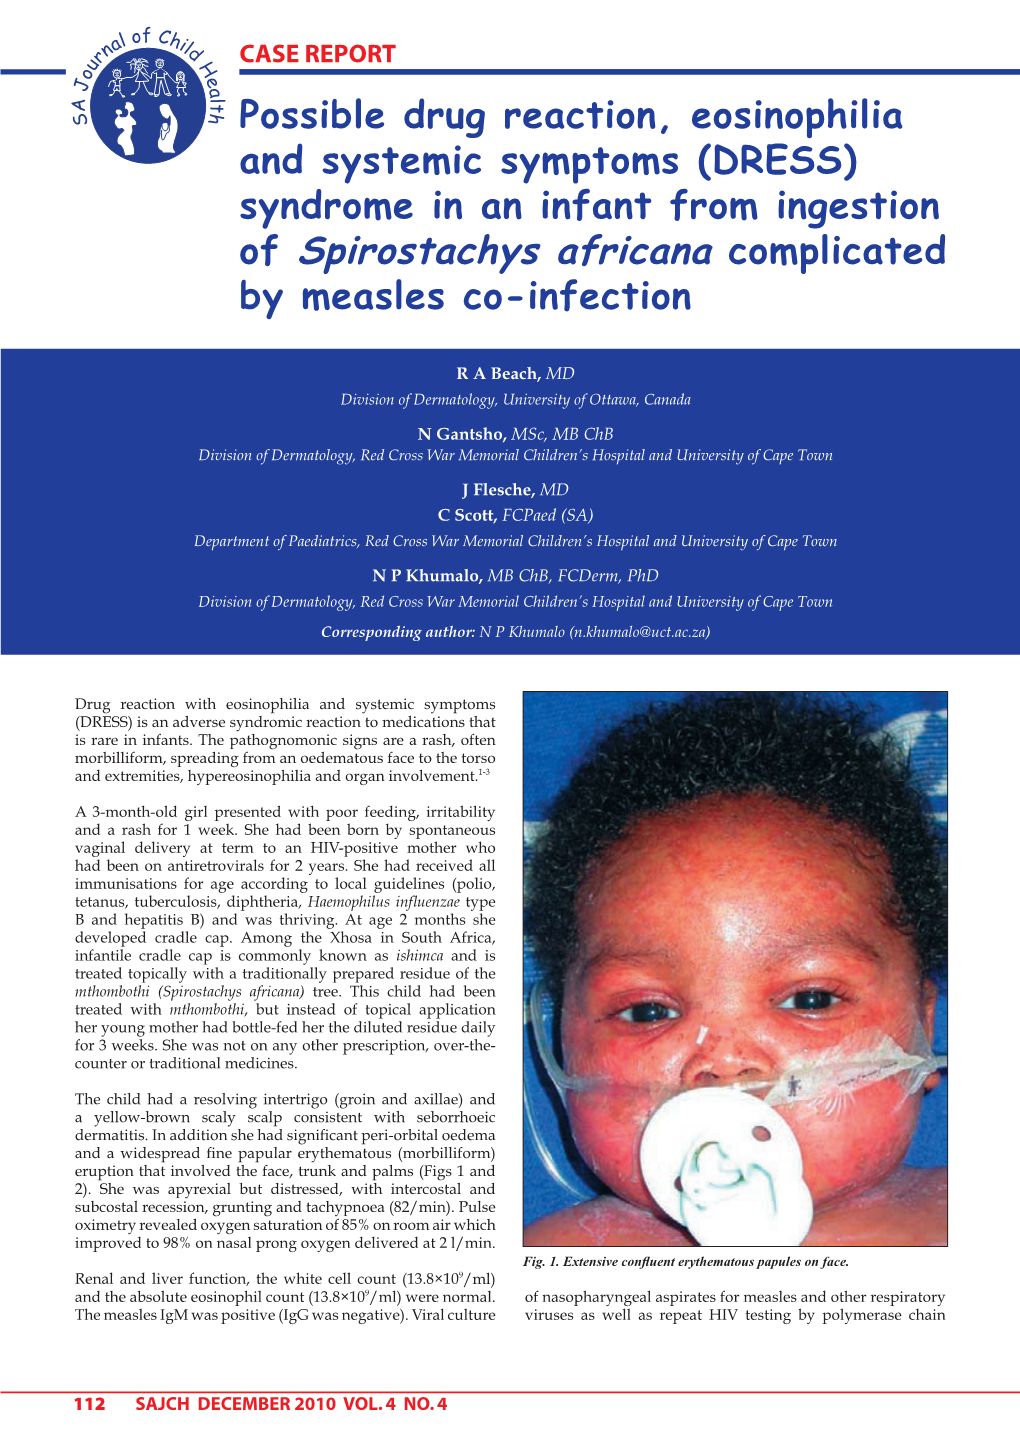 Of Spirostachys Africana Complicated by Measles Co-Infection